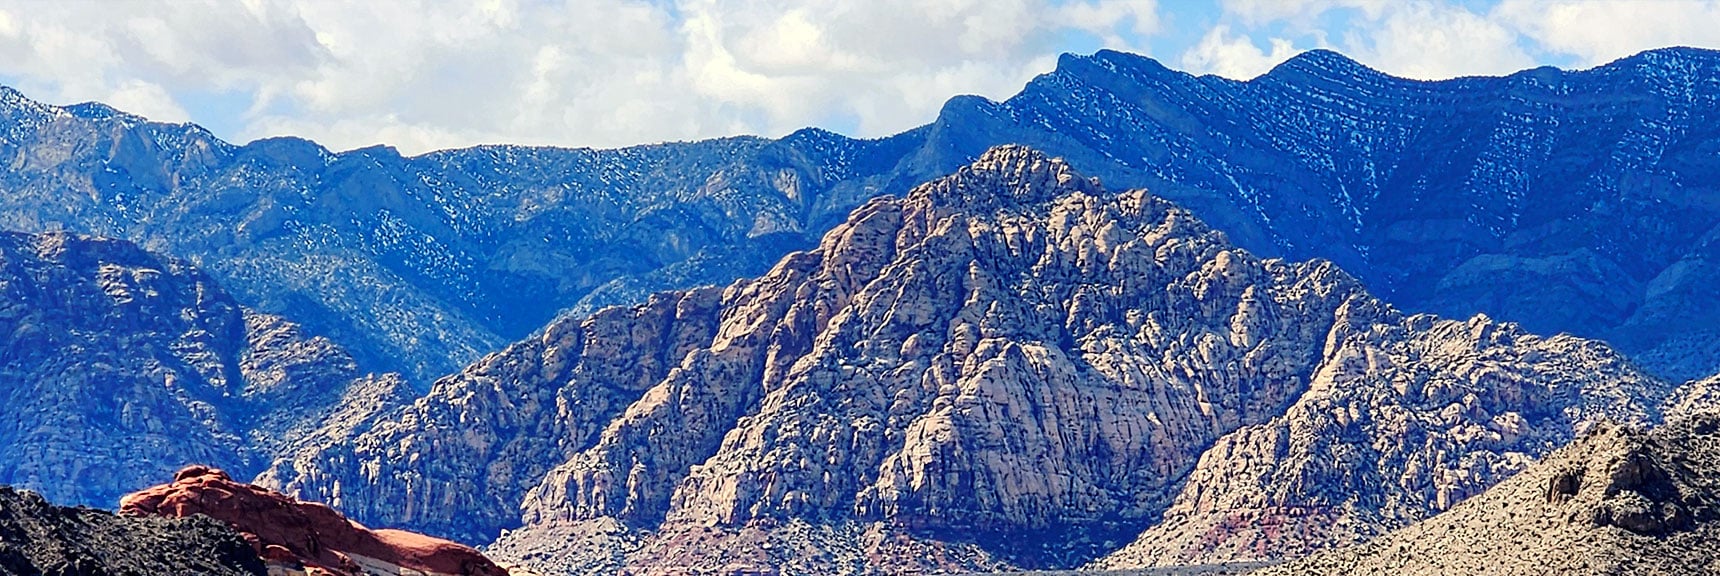 Larger View of White Rock Mt. in Red Rock Canyon. Wilson Ridge Background. | Gray Cap Ridge Southeast Summit | La Madre Mountains Wilderness, Nevada